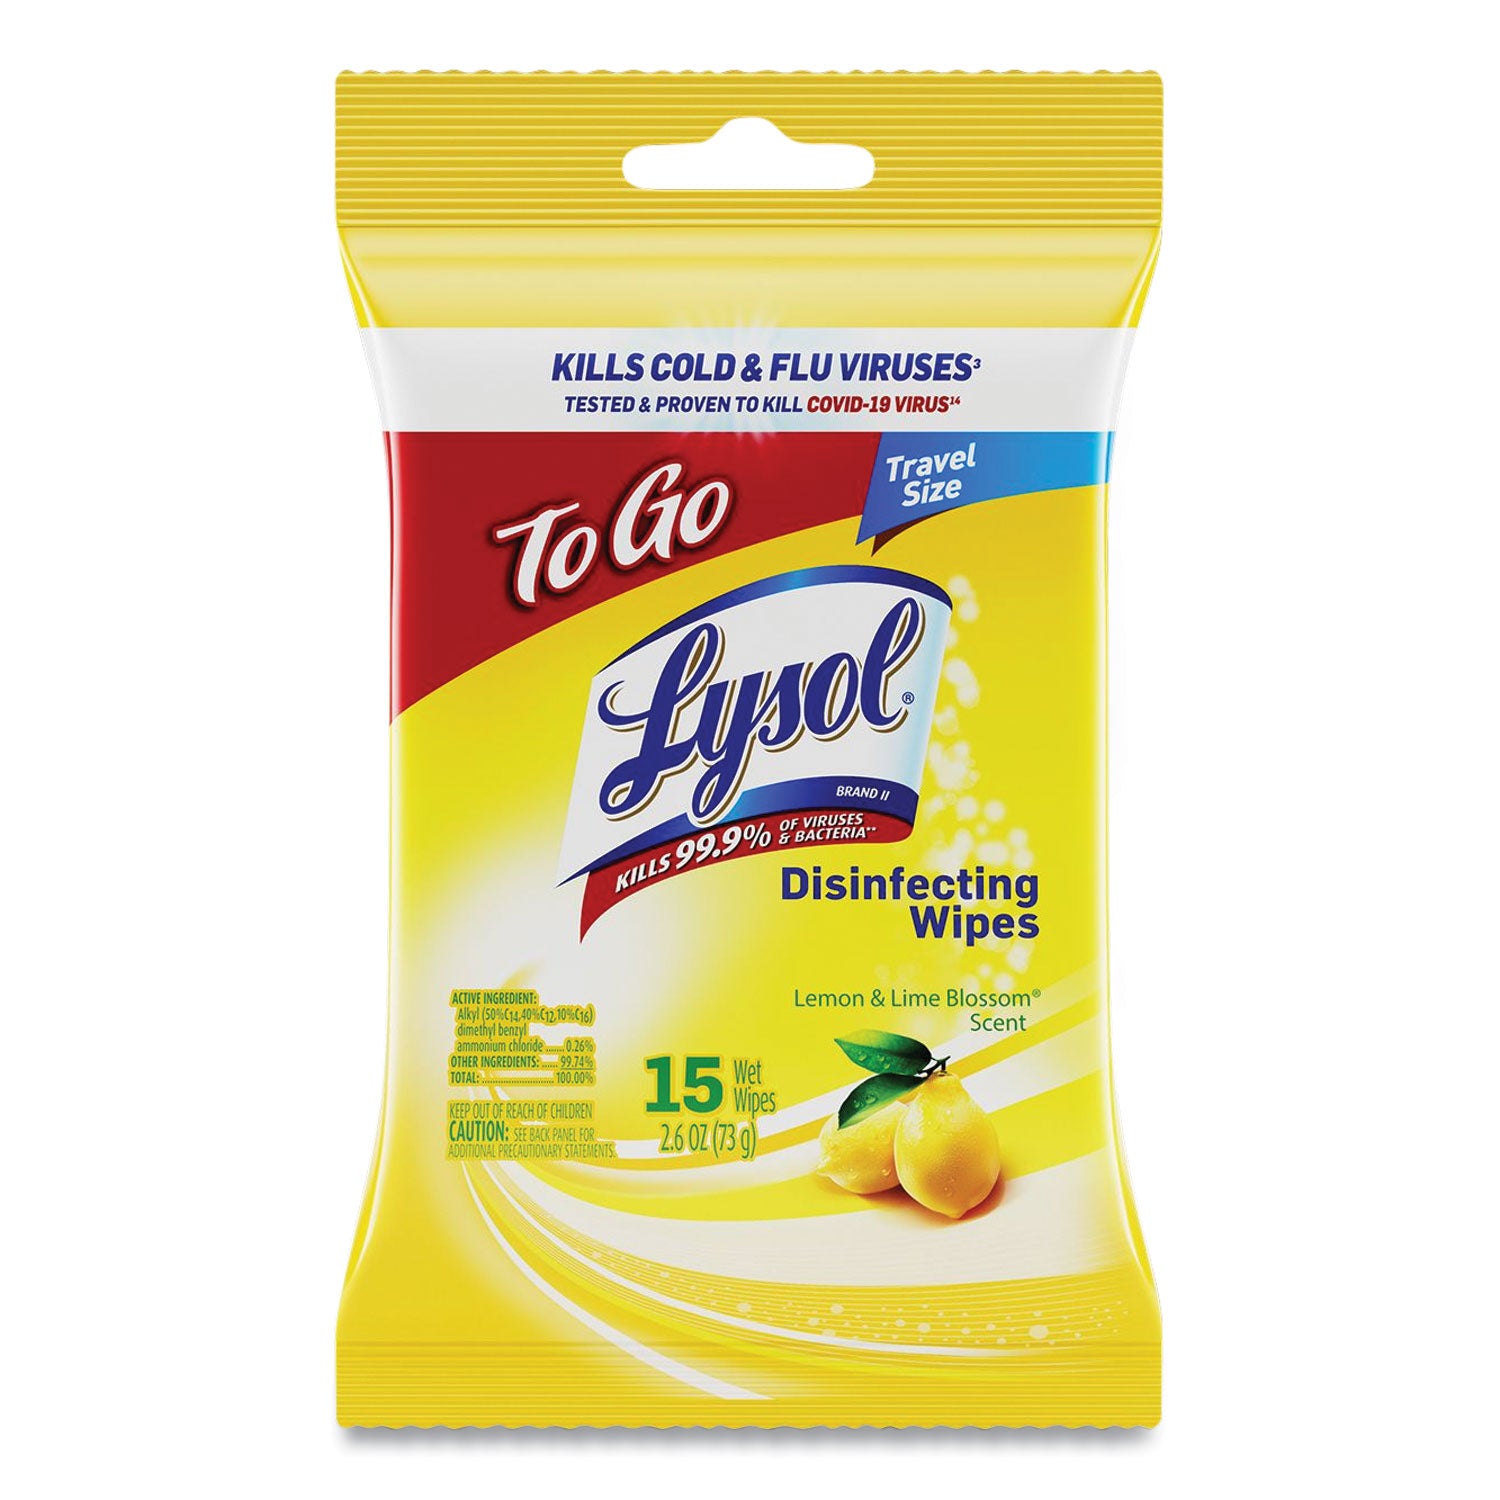 disinfecting-wipes-flatpacks-1-ply-669-x-787-lemon-and-lime-blossom-white-15-wipes-flat-pack-24-flat-packs-carton_rac99799ct - 2